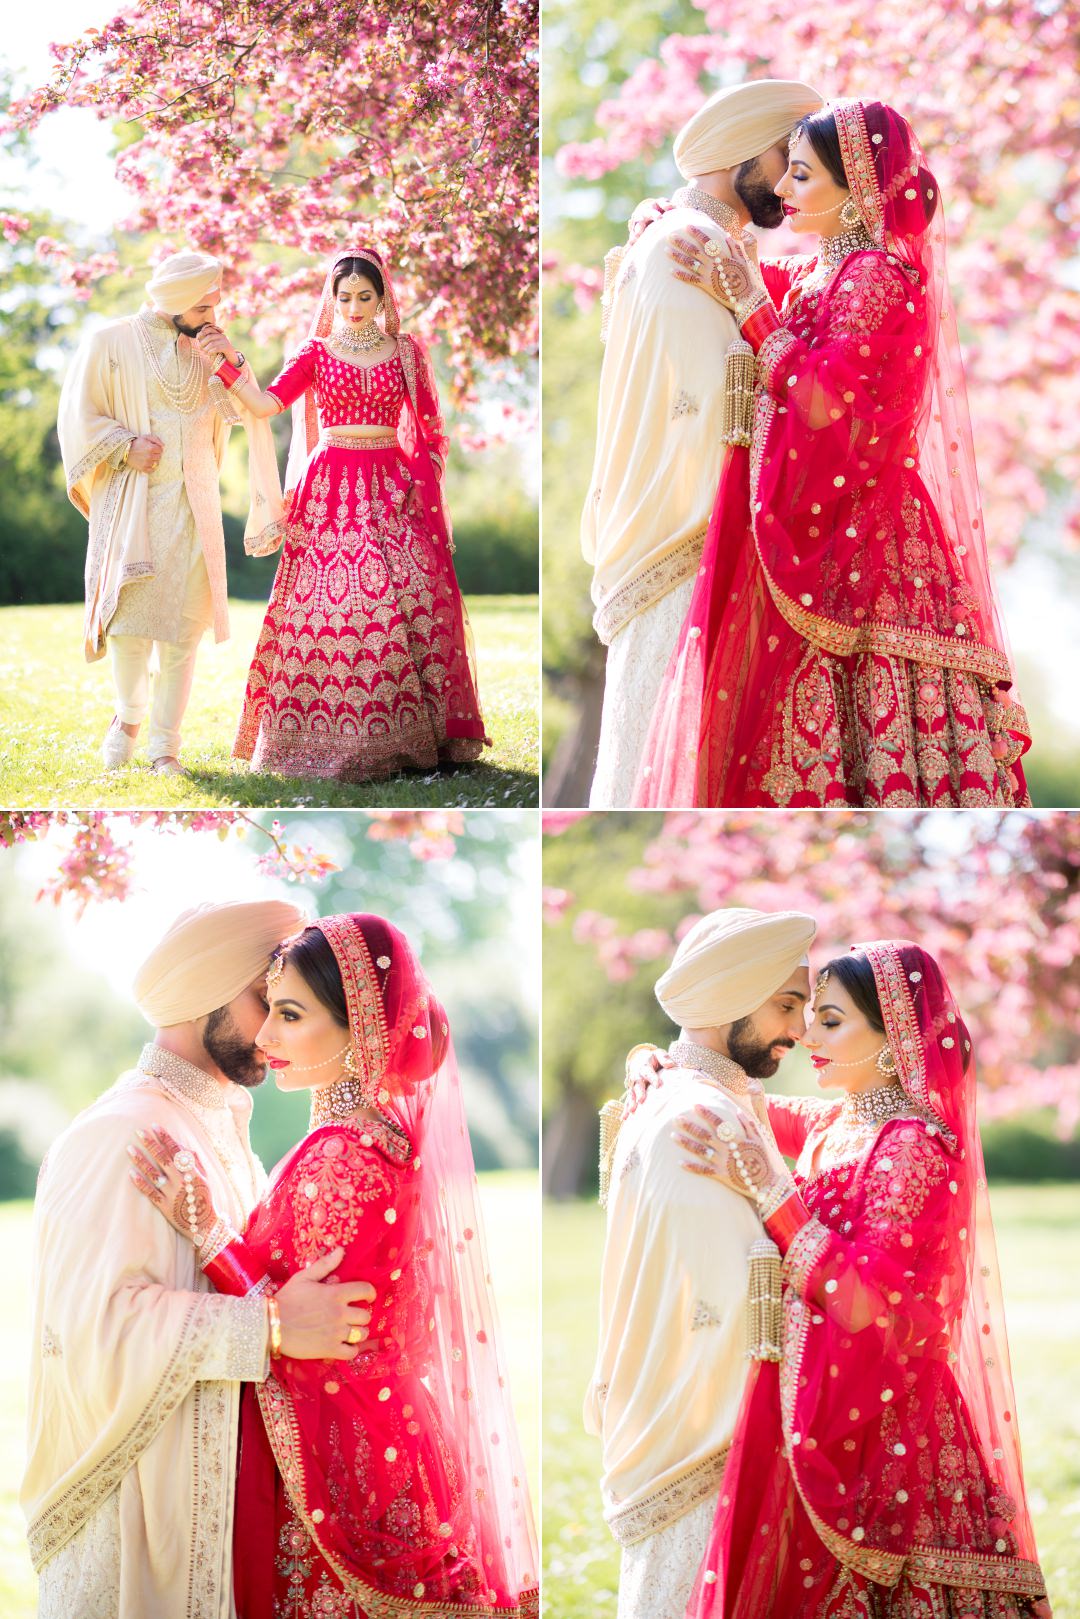 Stunning Sikh couple Spring shoot during which time is was very hot